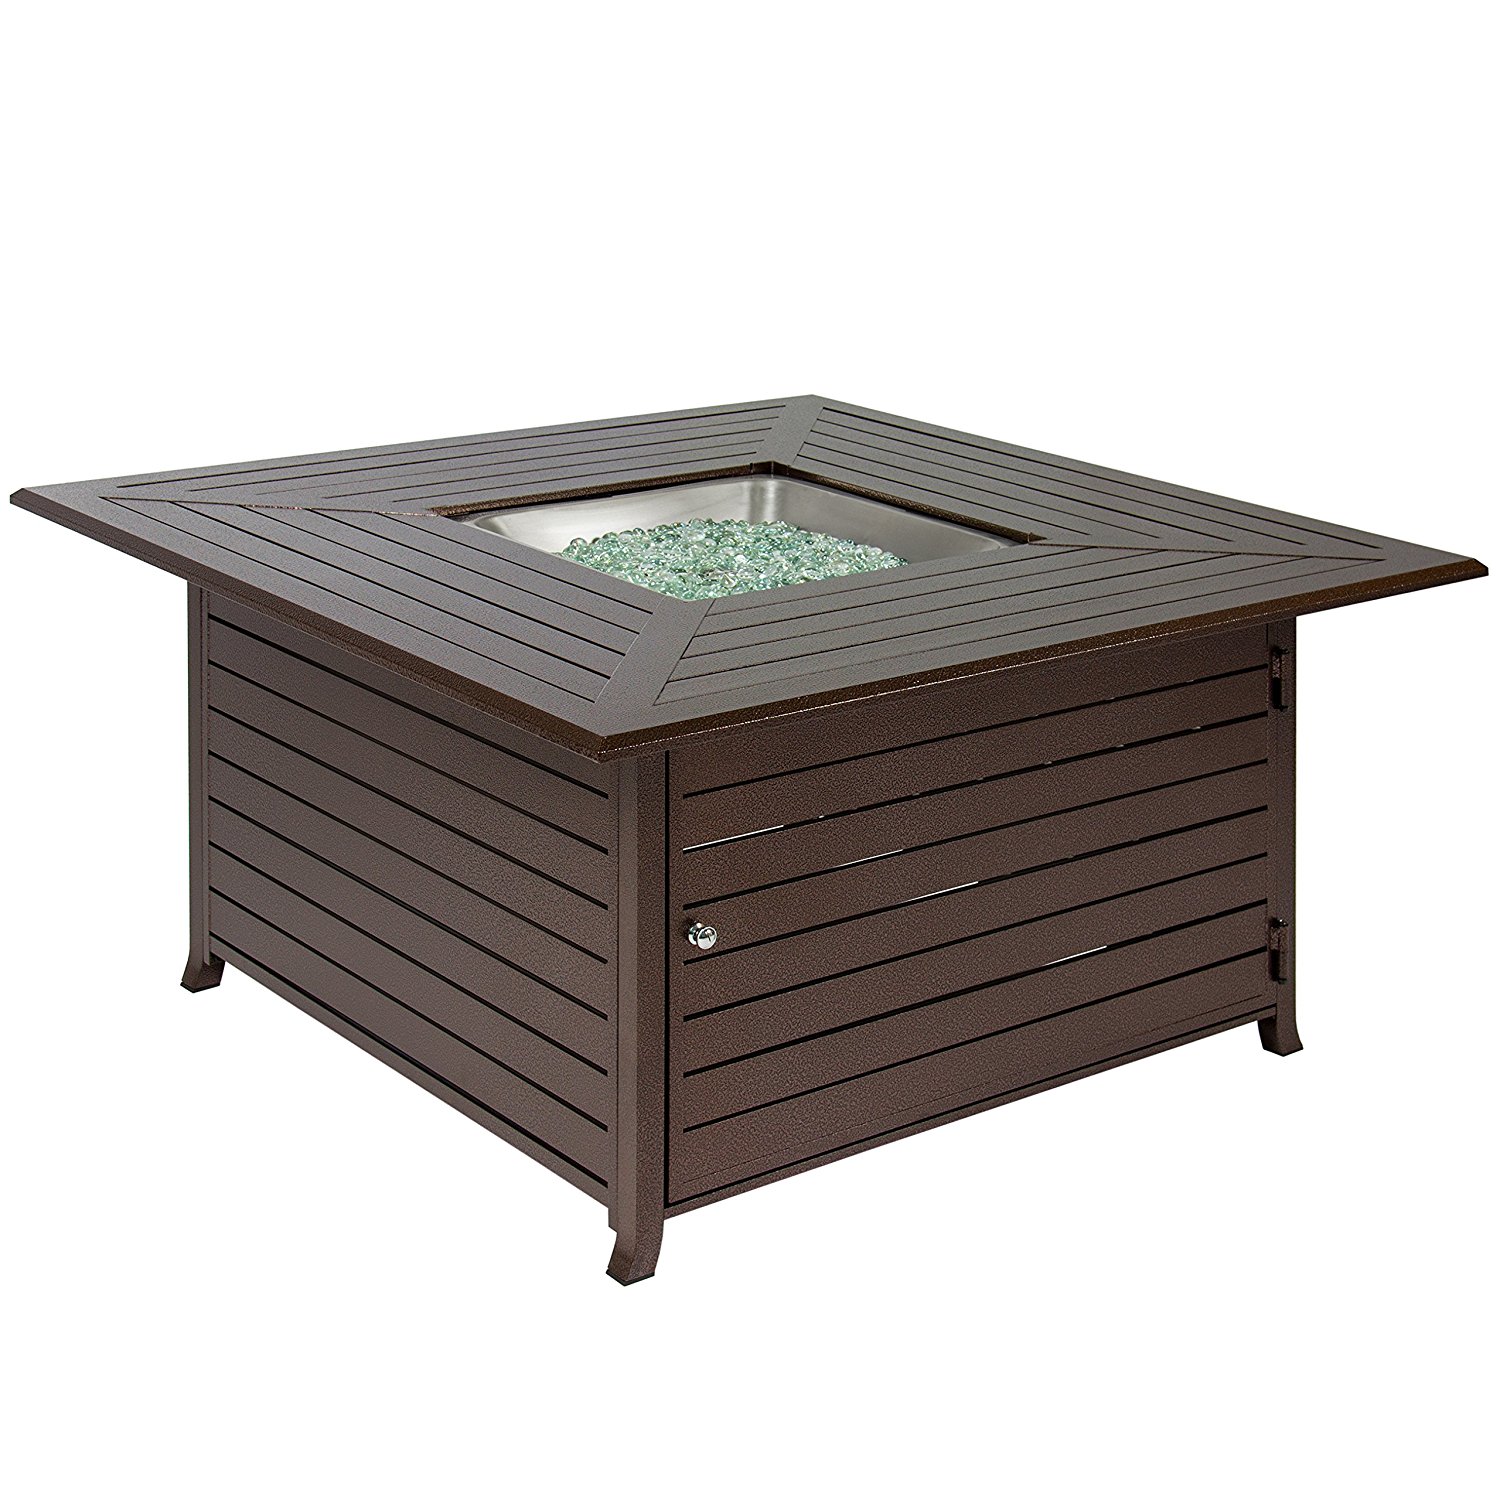 Fire pit table for Outdoor from Best Choice Products